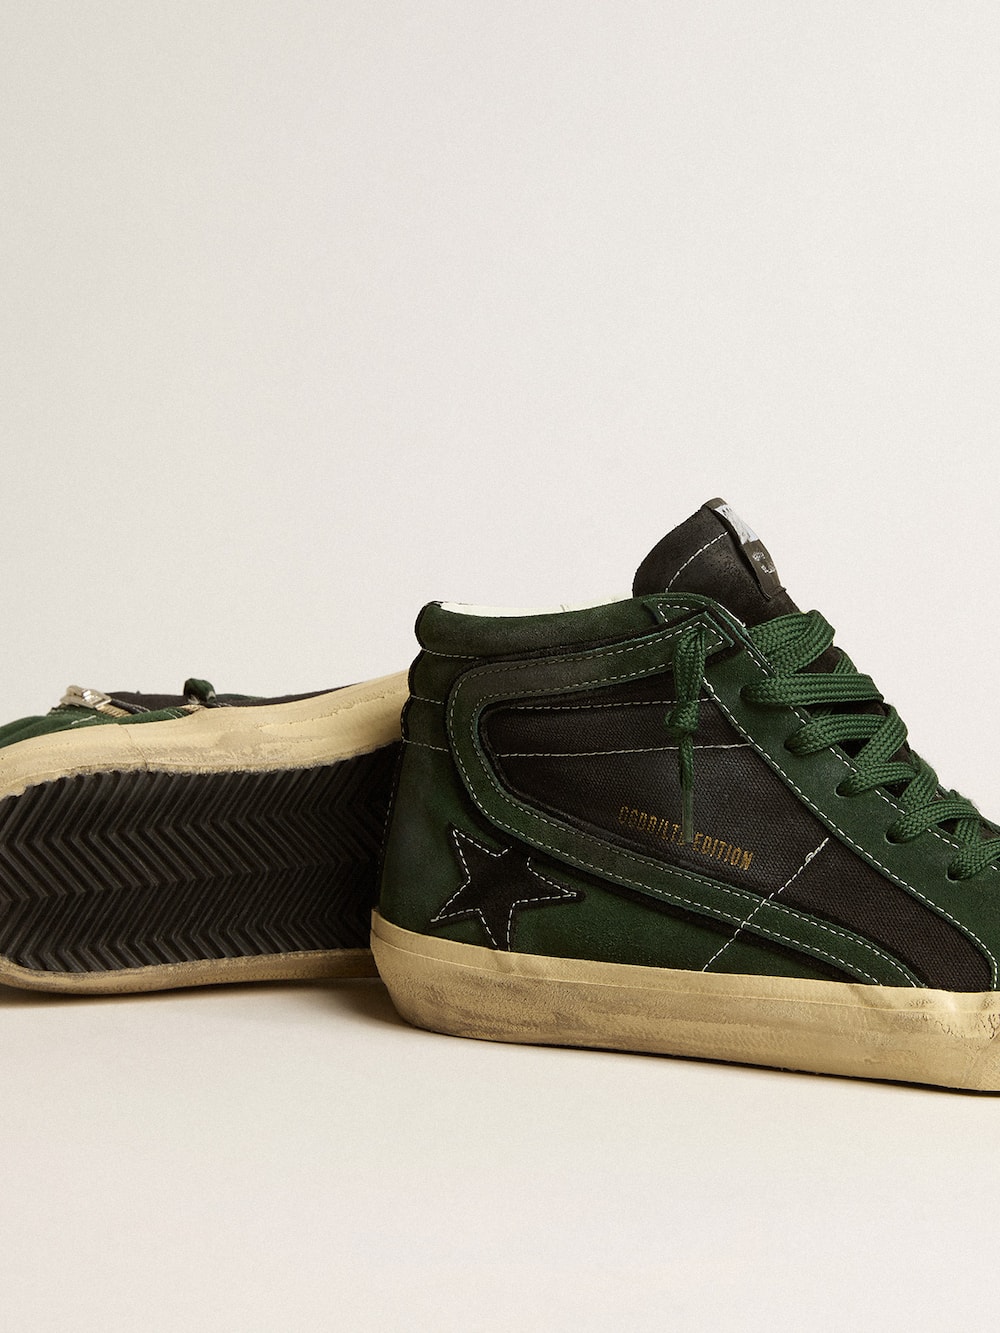 Golden Goose - Slide LTD in green suede and black canvas with suede star and flash in 